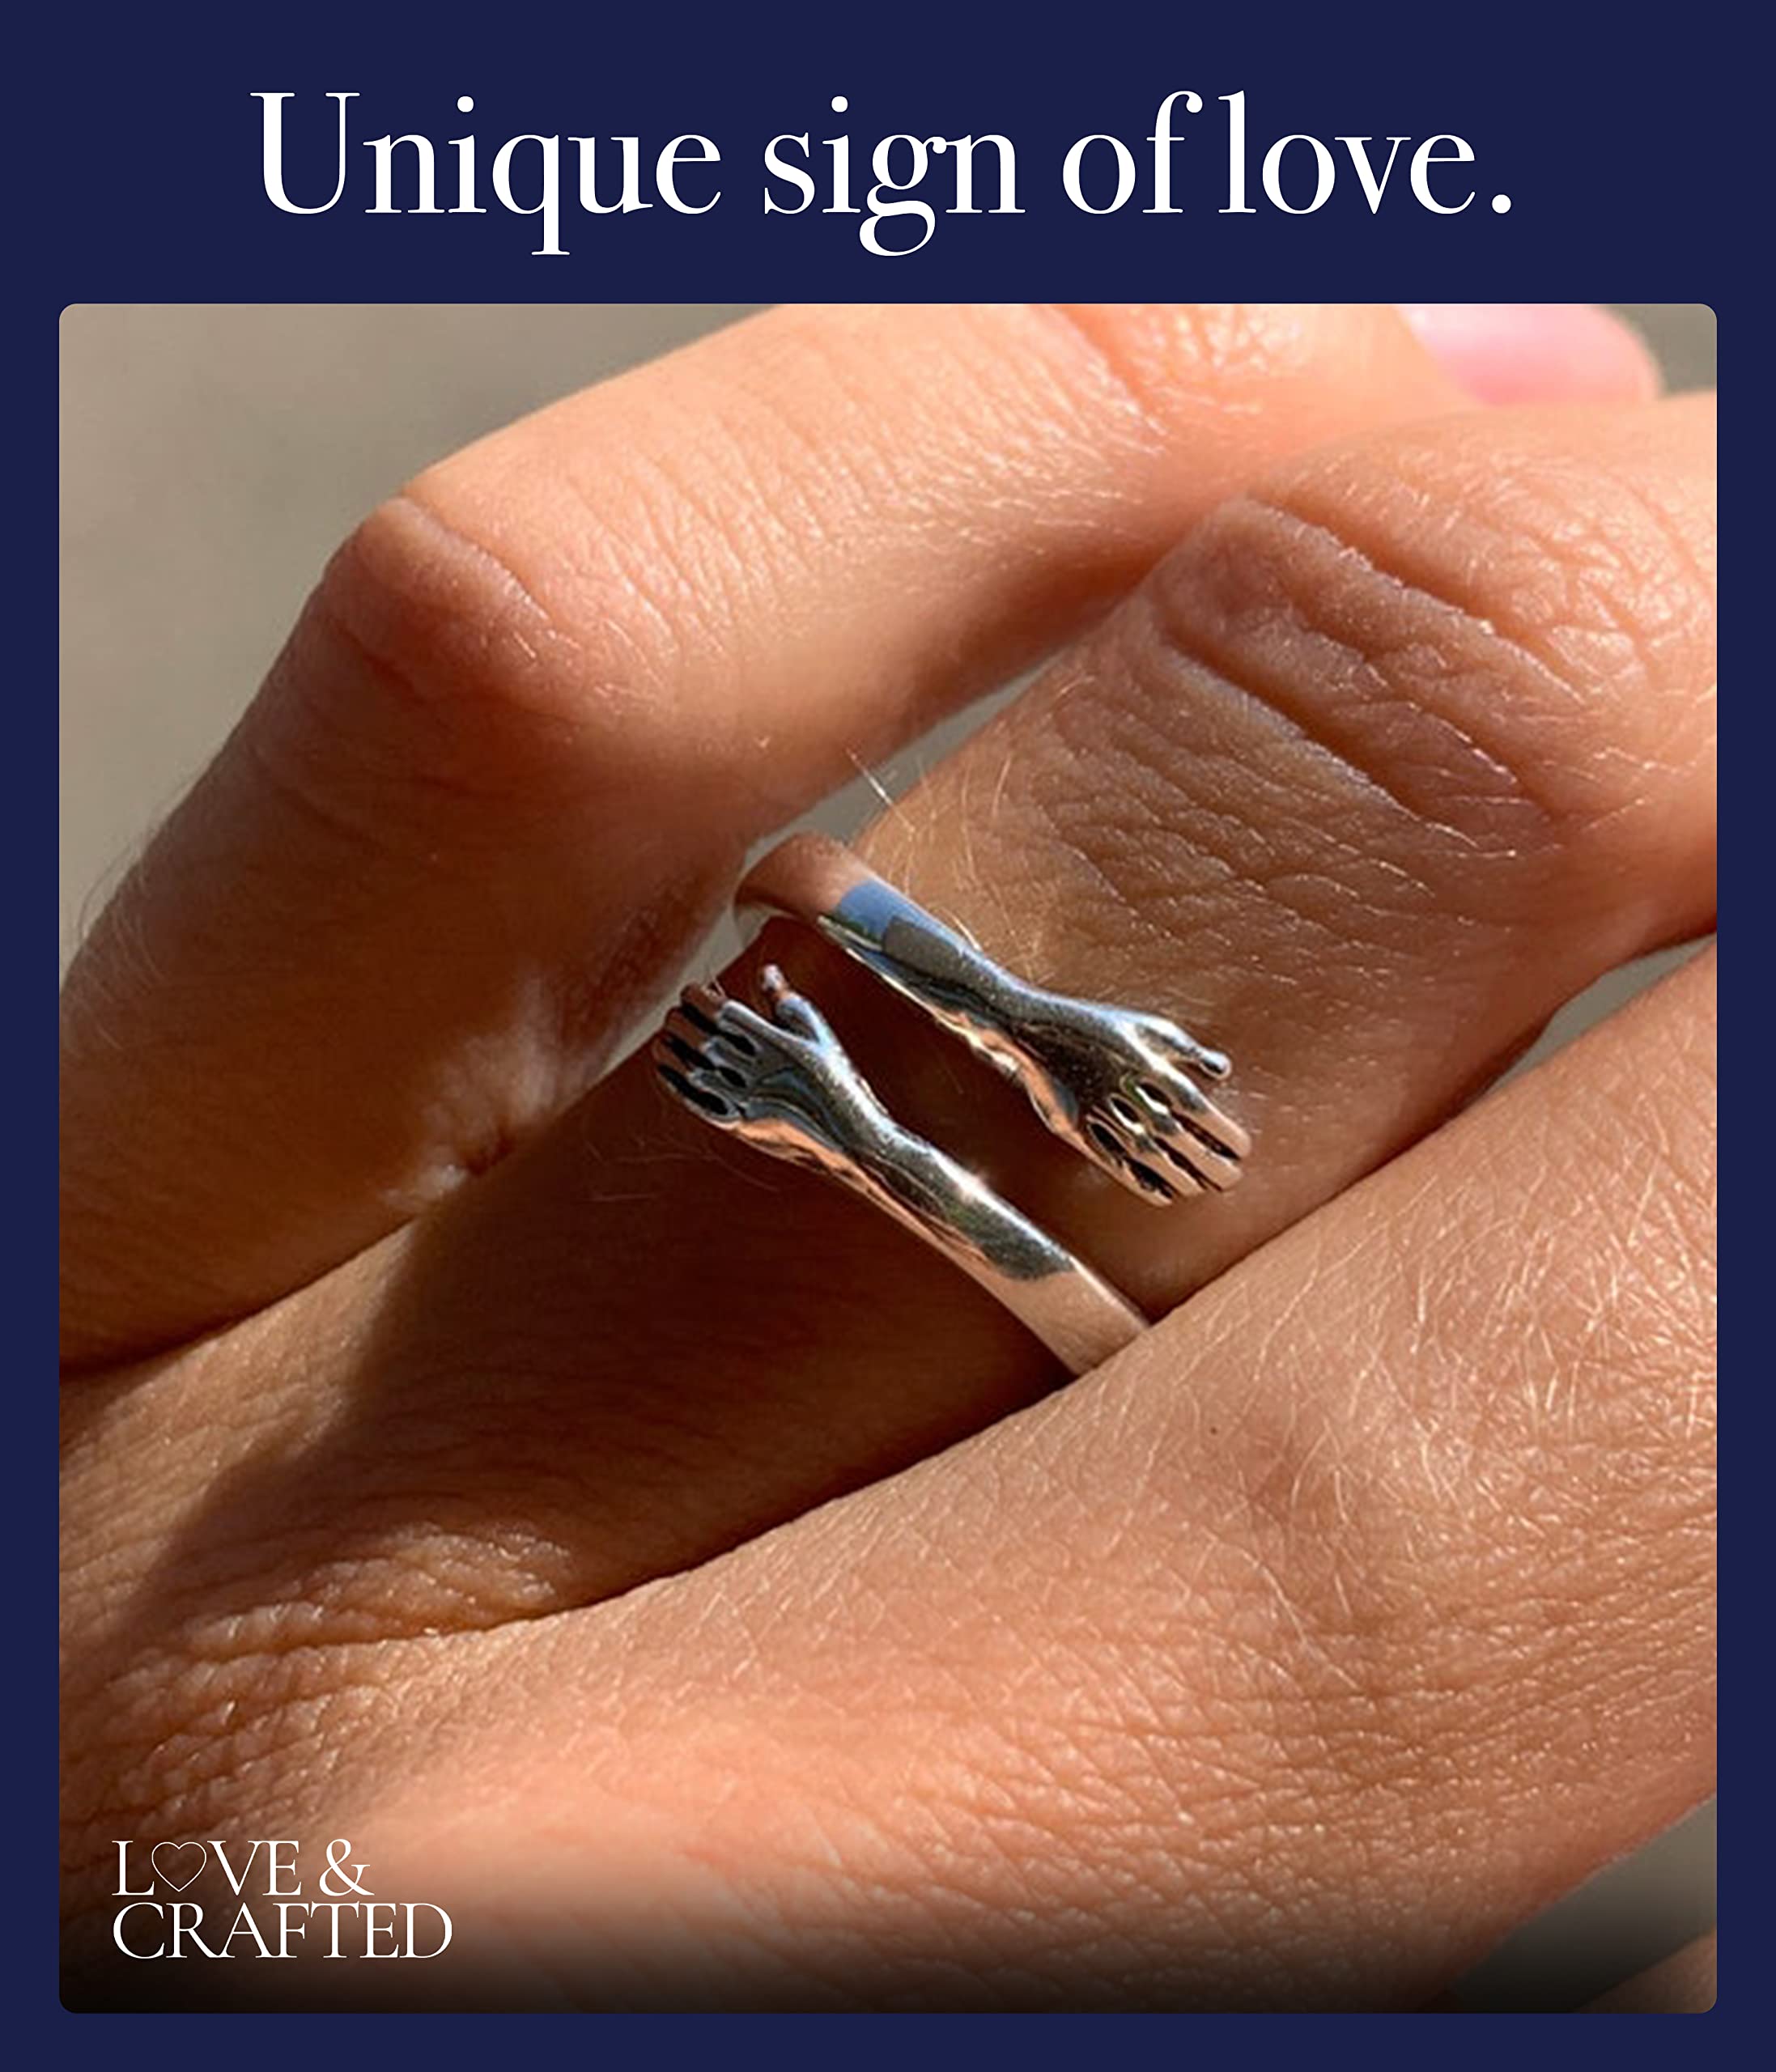 Love & Crafted Hug Ring 925 Sterling Silver adjustable - Mother Daughter Rings - Hug Ring for Granddaughter - Teen Promise Ring - Daughter Gift from Mom - Friendship Rings - Hand Ring - Love Rings